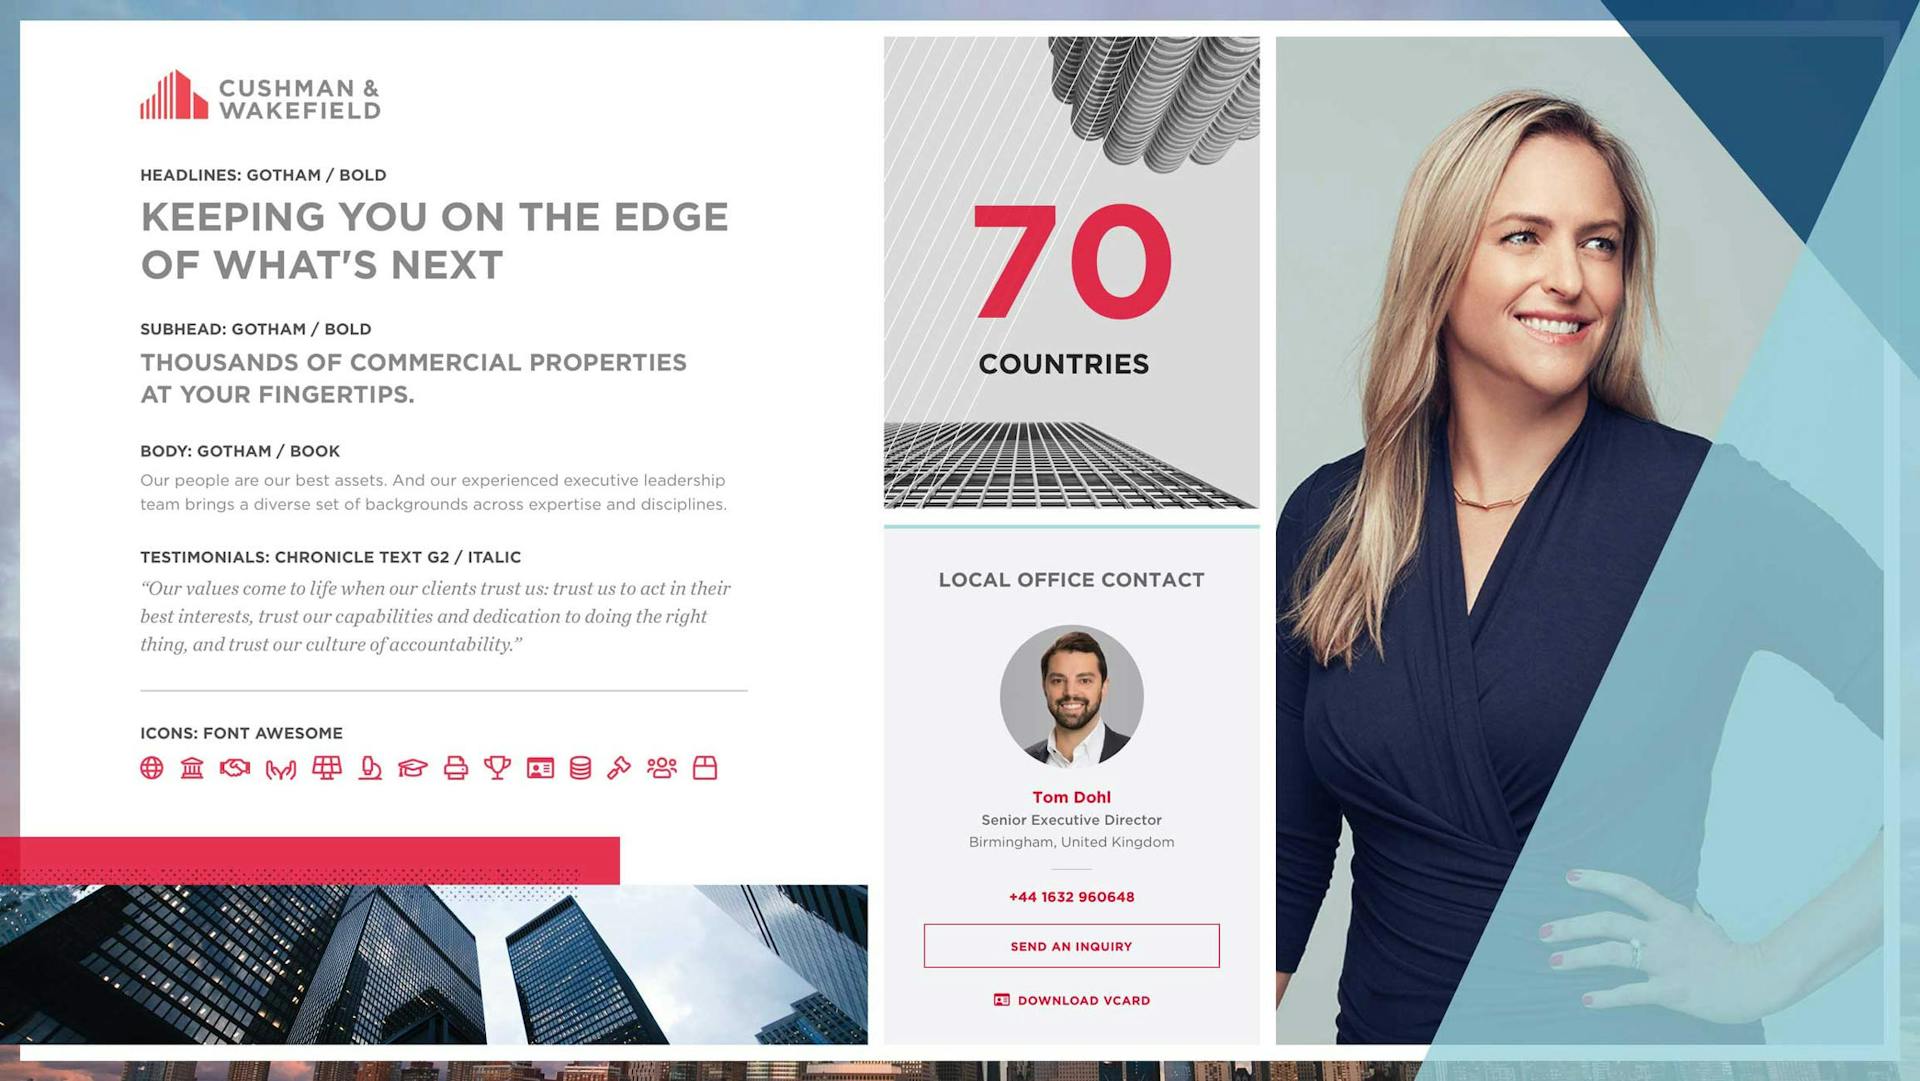 A Horizontal styleboard for the Cushman & Wakefield redesign